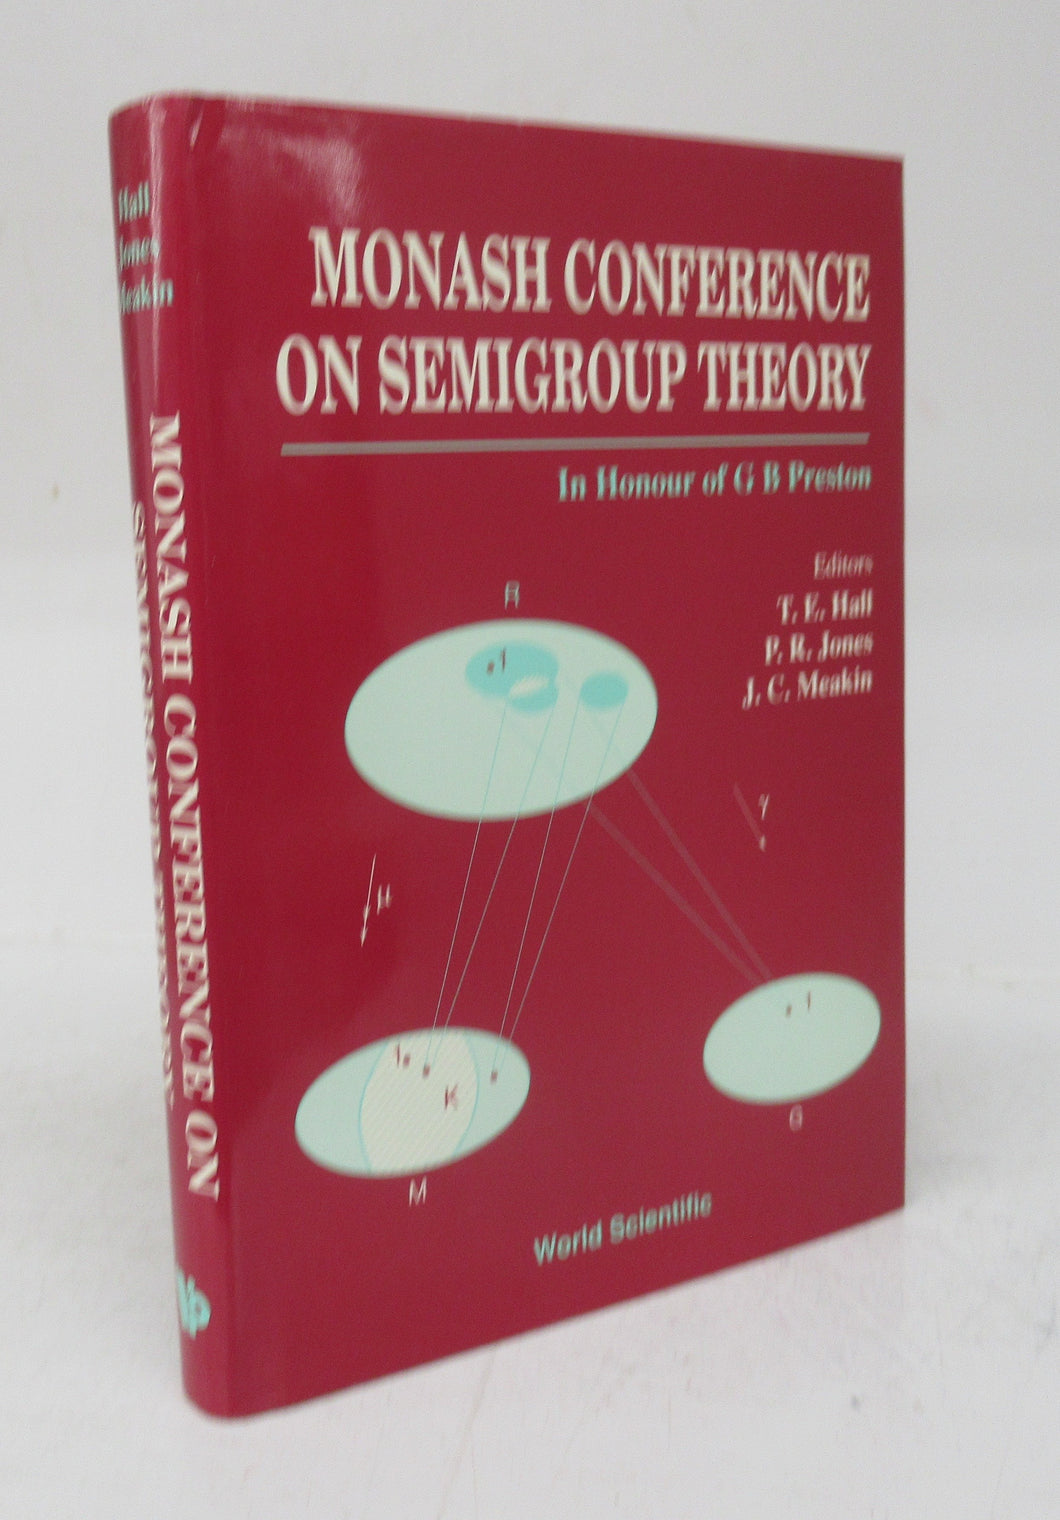 Monash Conference on Semigroup Theory In Honour of G. B. Preston